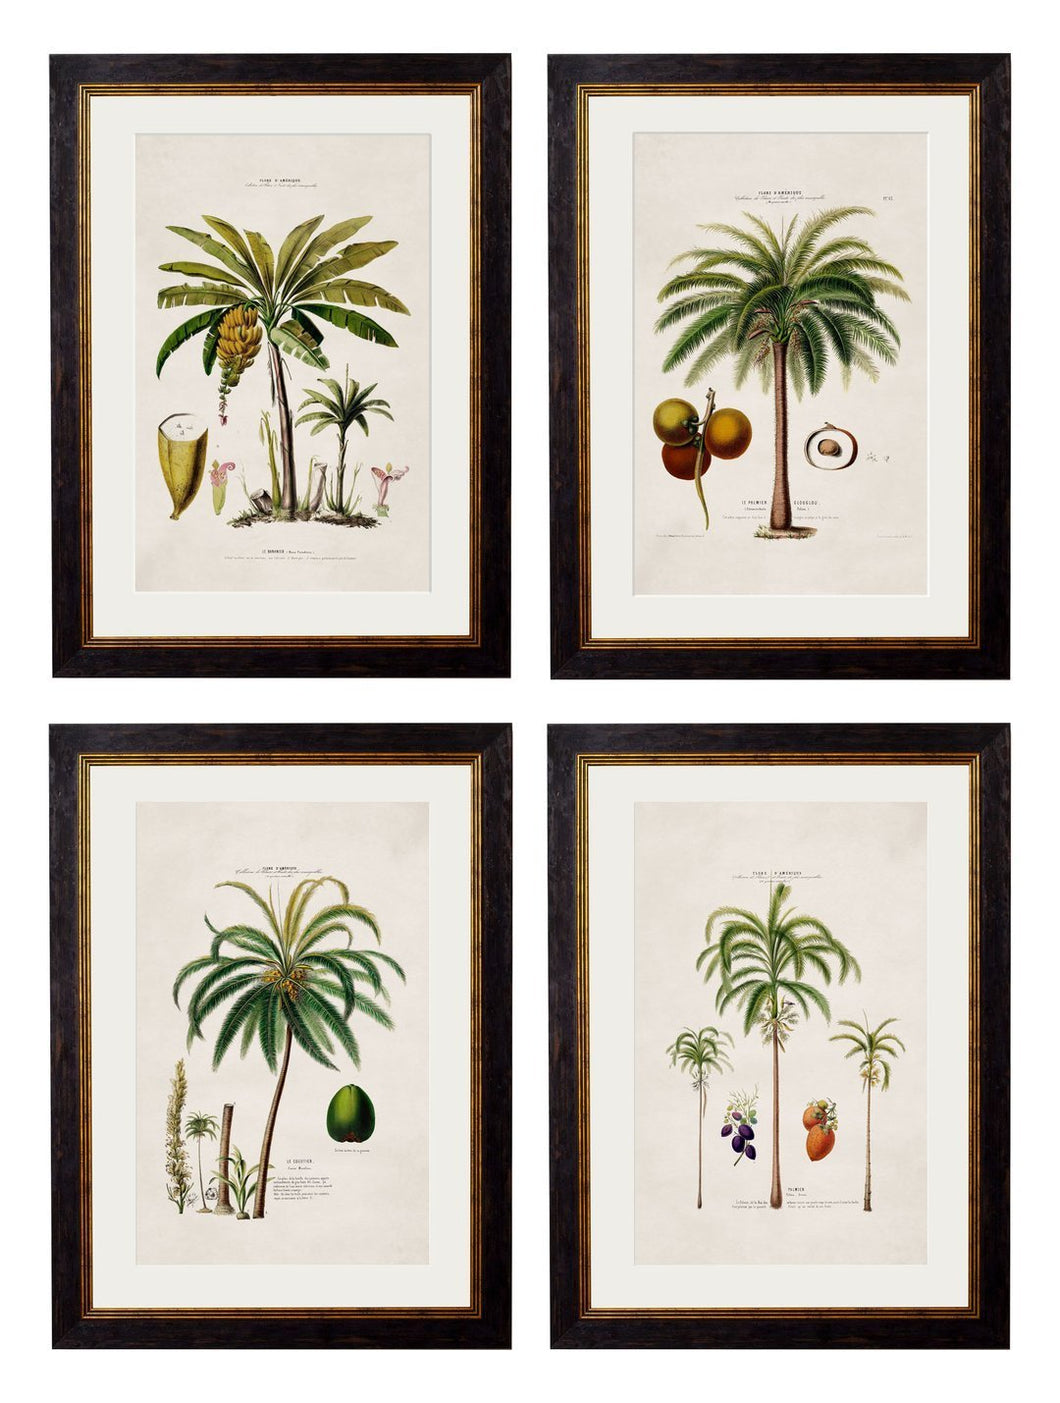 Framed British Studies of South American Palm Trees - Referenced From 1800s French Hand Coloured IllustrationsVintage FrogPictures & Prints